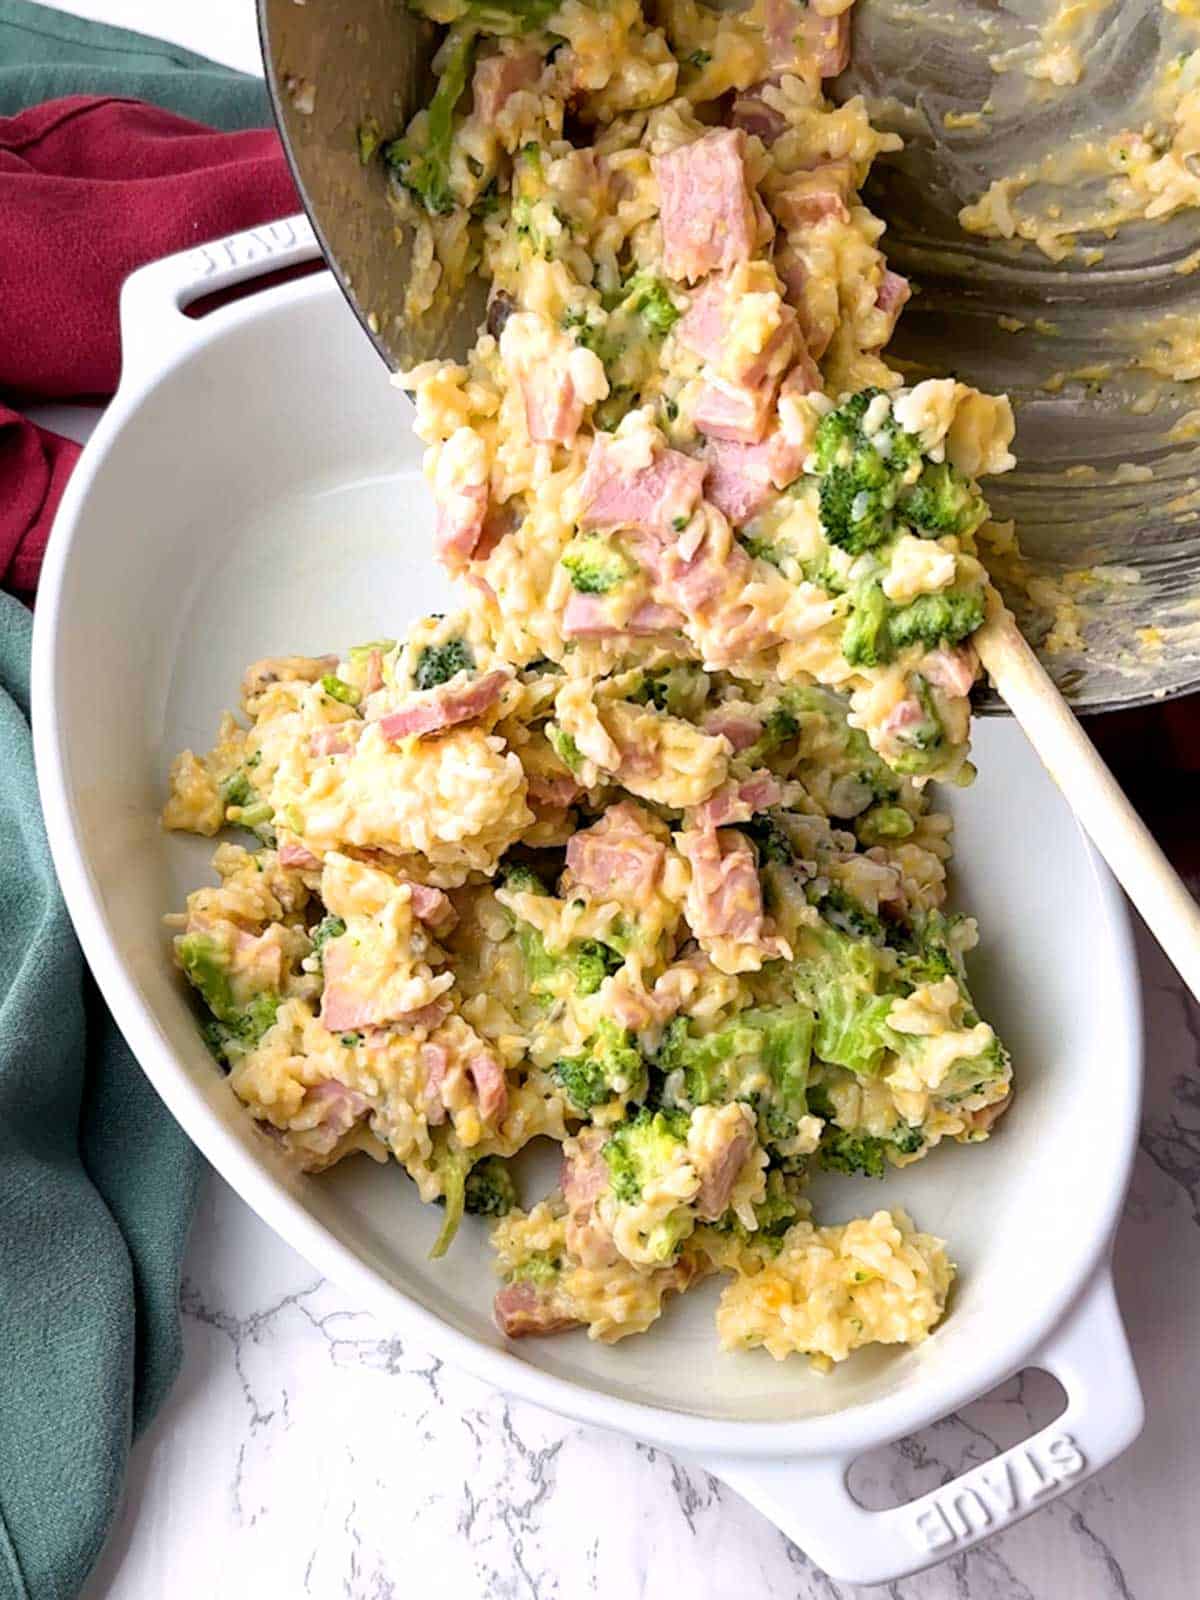 Transferring ham broccoli and rice mixture to a casserole dish.